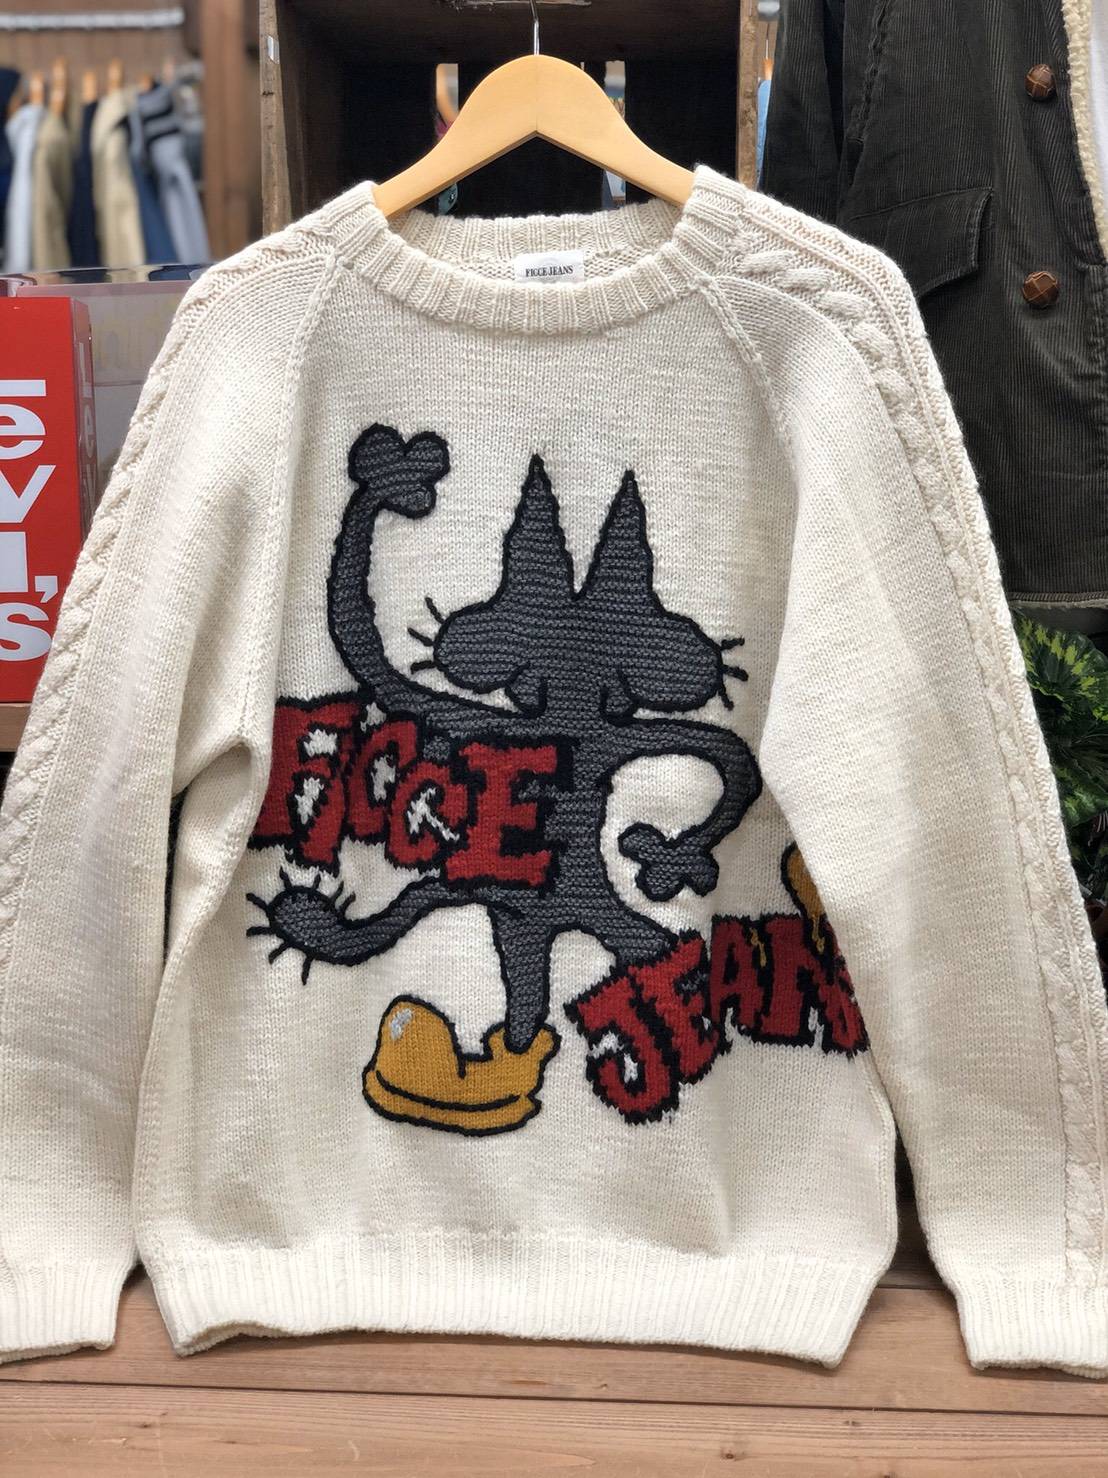 ficce　フィッチェ　HAND KNIT　セーター　にゃロメ　ニャロメ